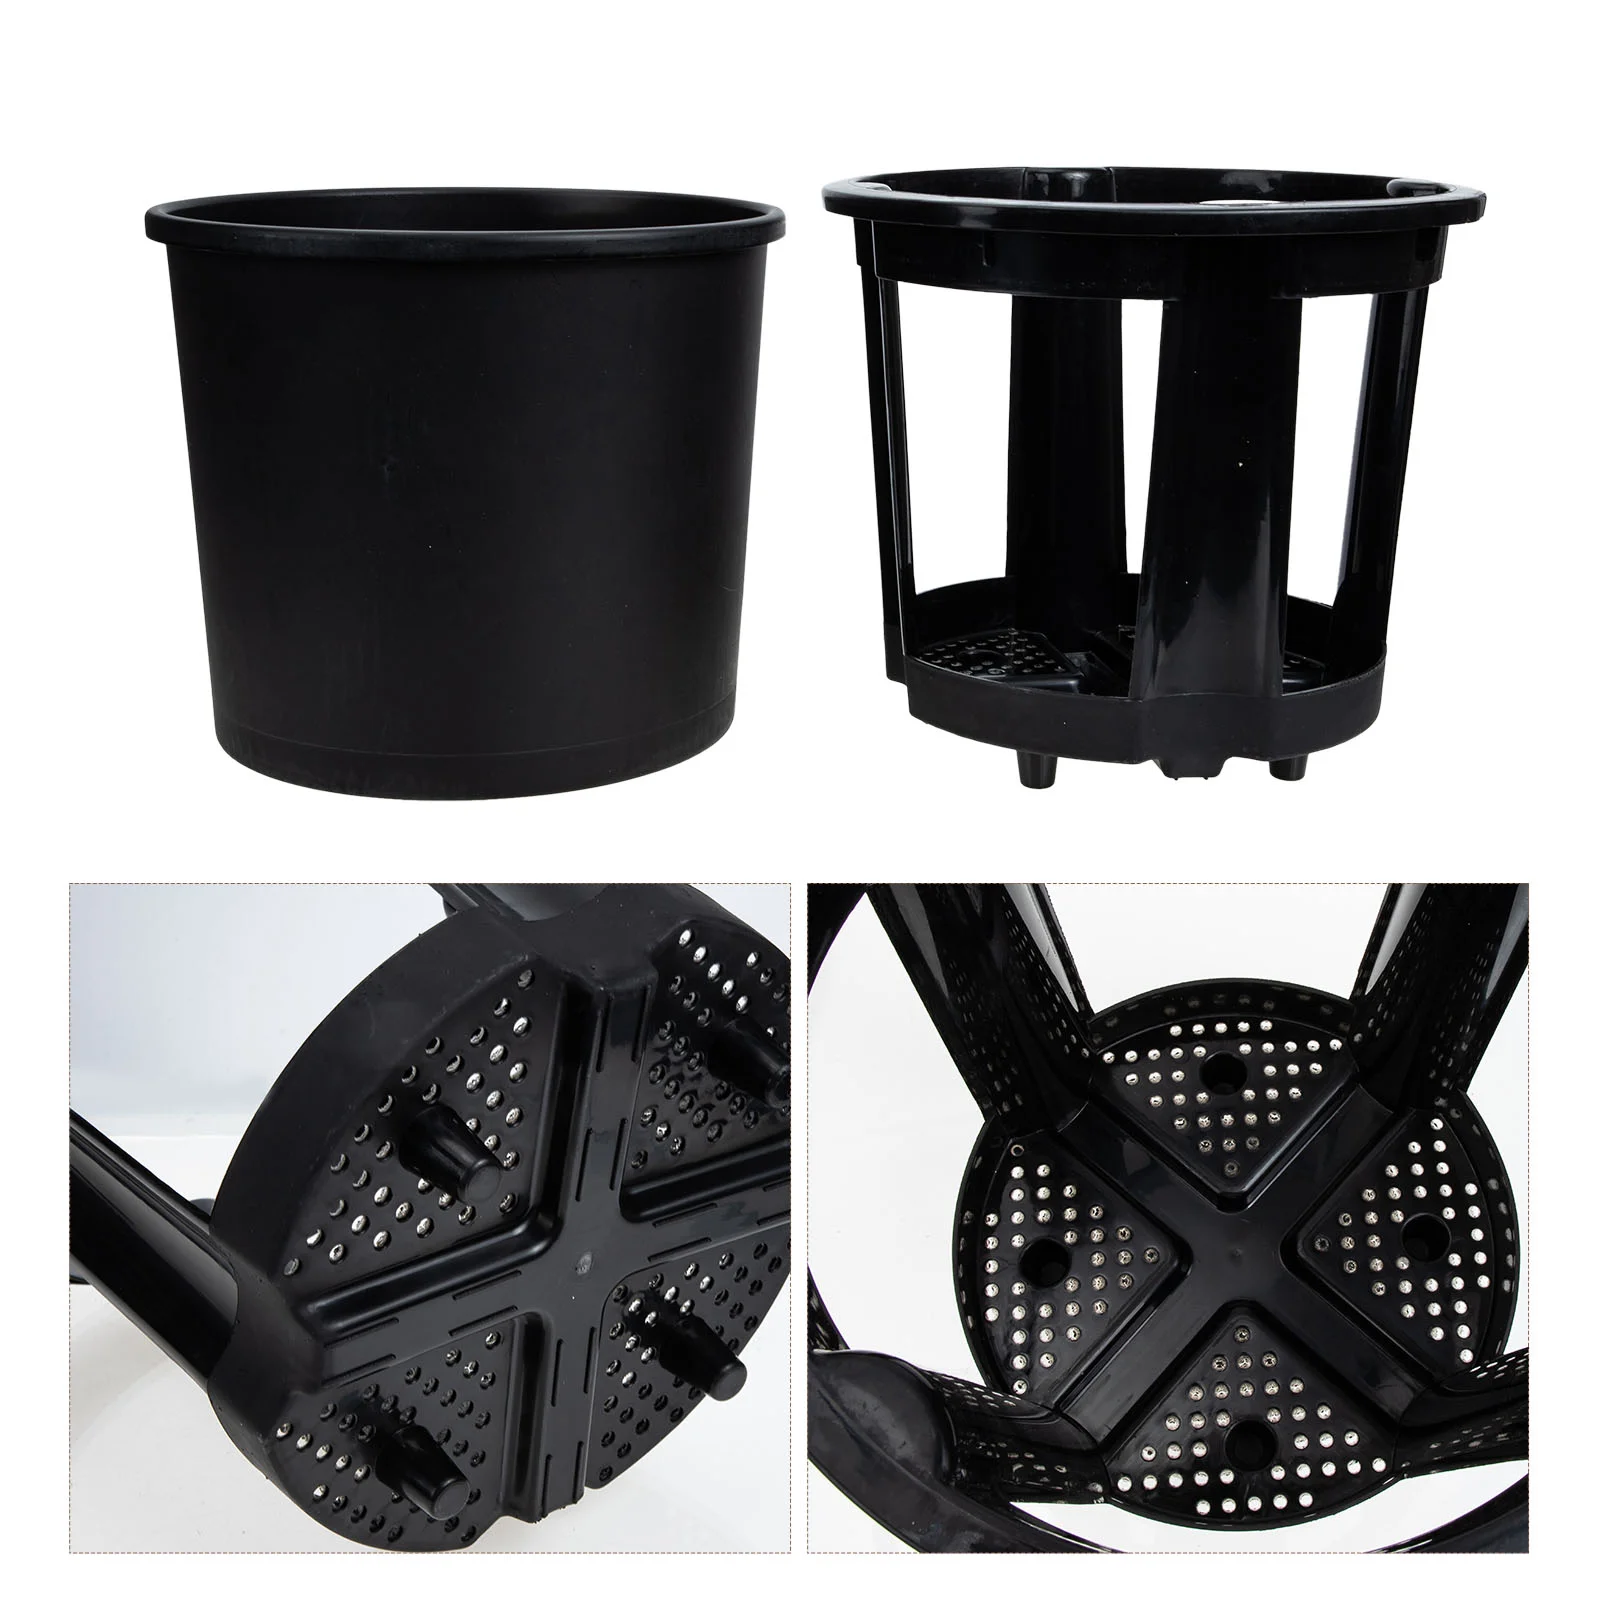 

Potato Sweet Growing Home Box Gardening Planting Accessory Holder Vegetable Growth Bucket